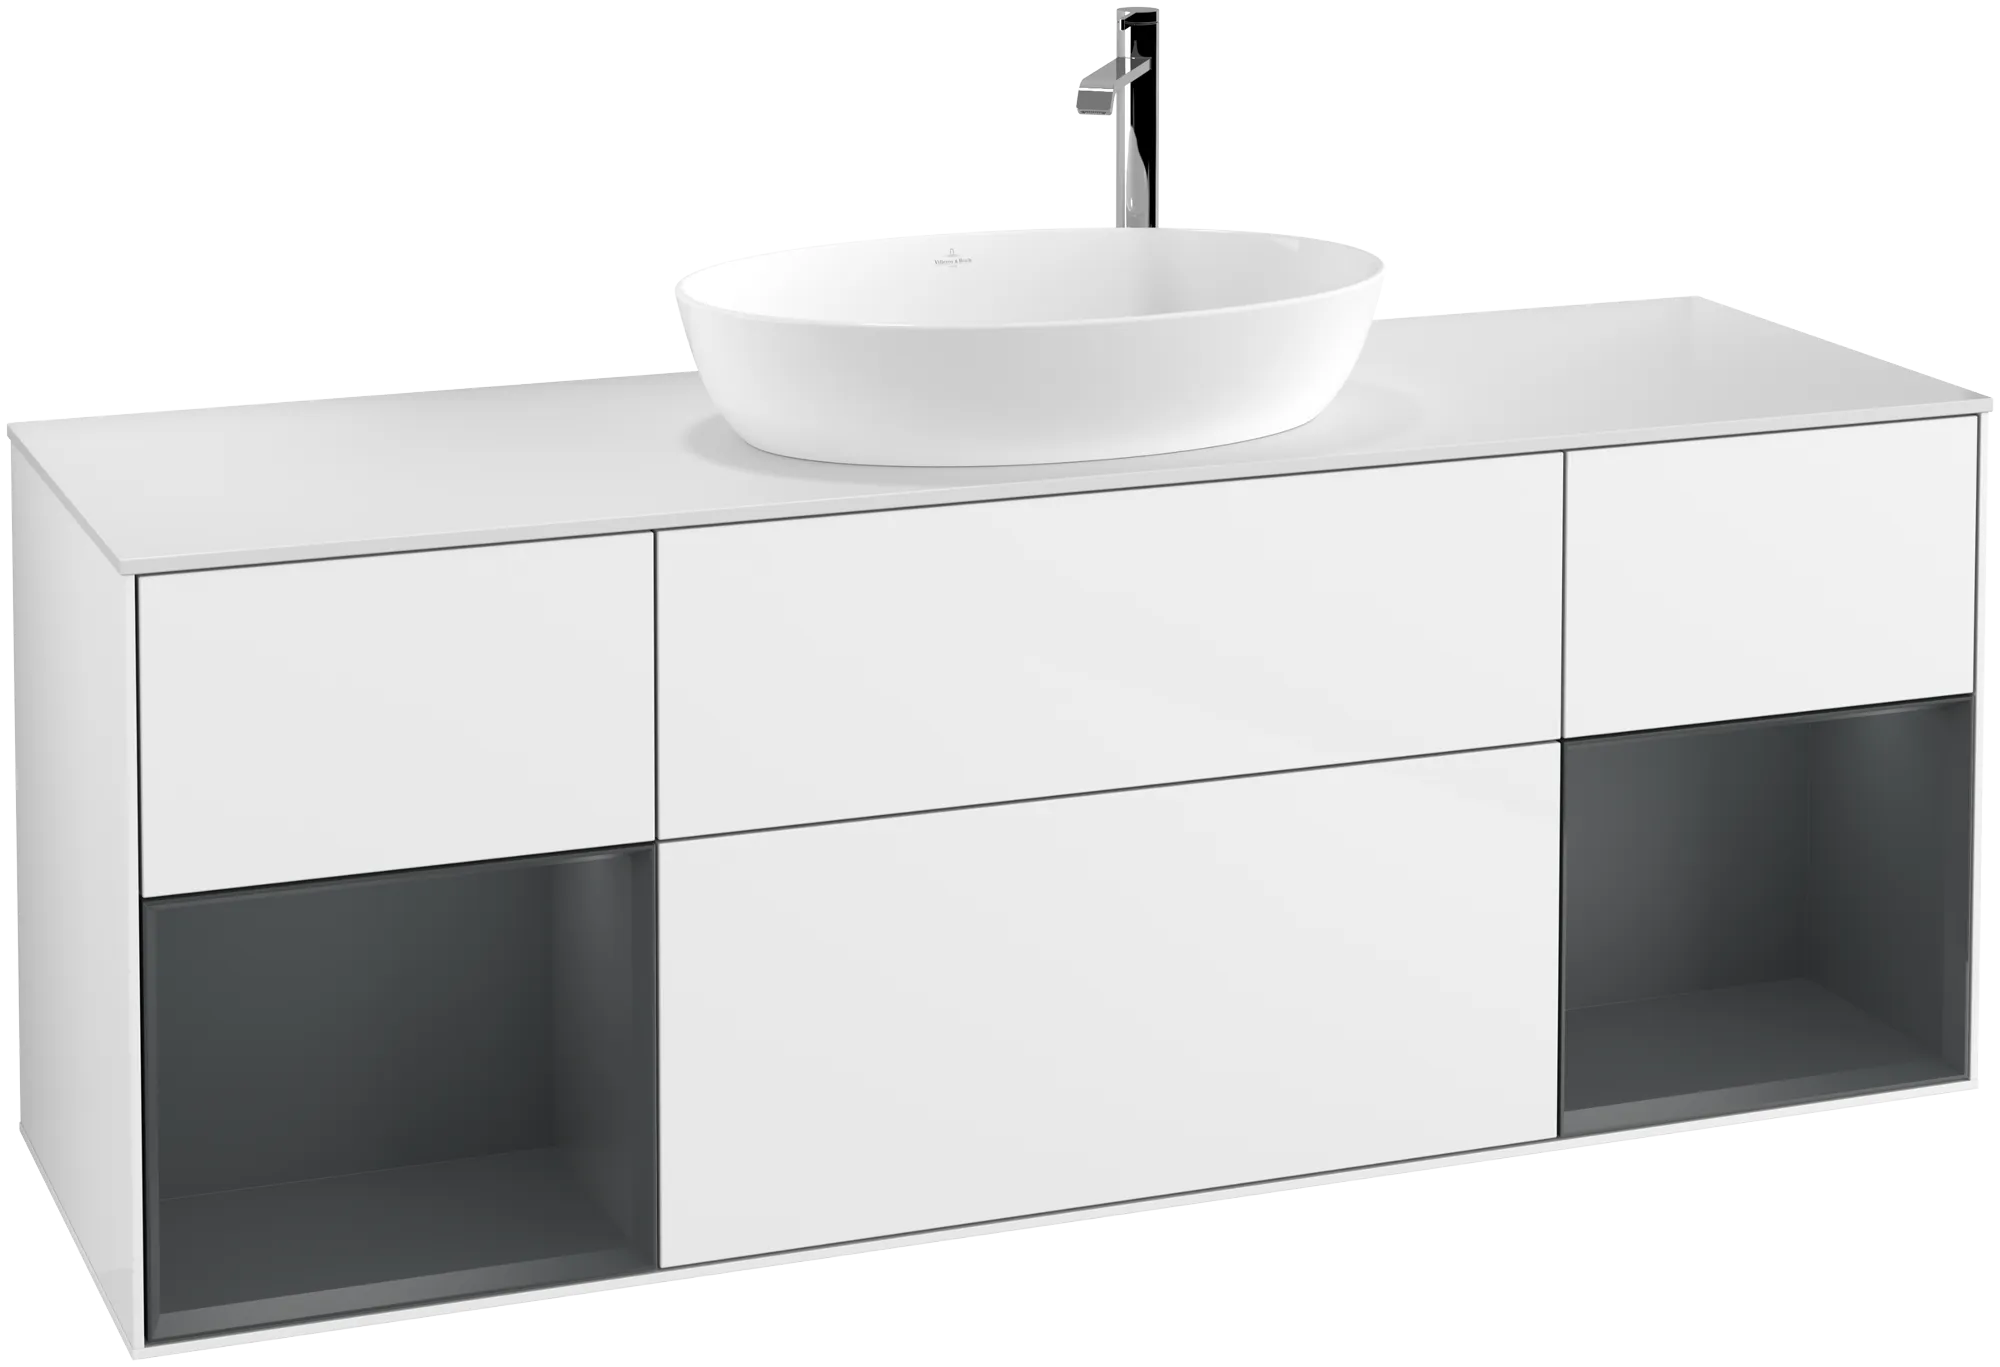 VILLEROY BOCH Finion Vanity unit, with lighting, 4 pull-out compartments, 1600 x 603 x 501 mm, Glossy White Lacquer / Midnight Blue Matt Lacquer / Glass White Matt #G981HGGF resmi